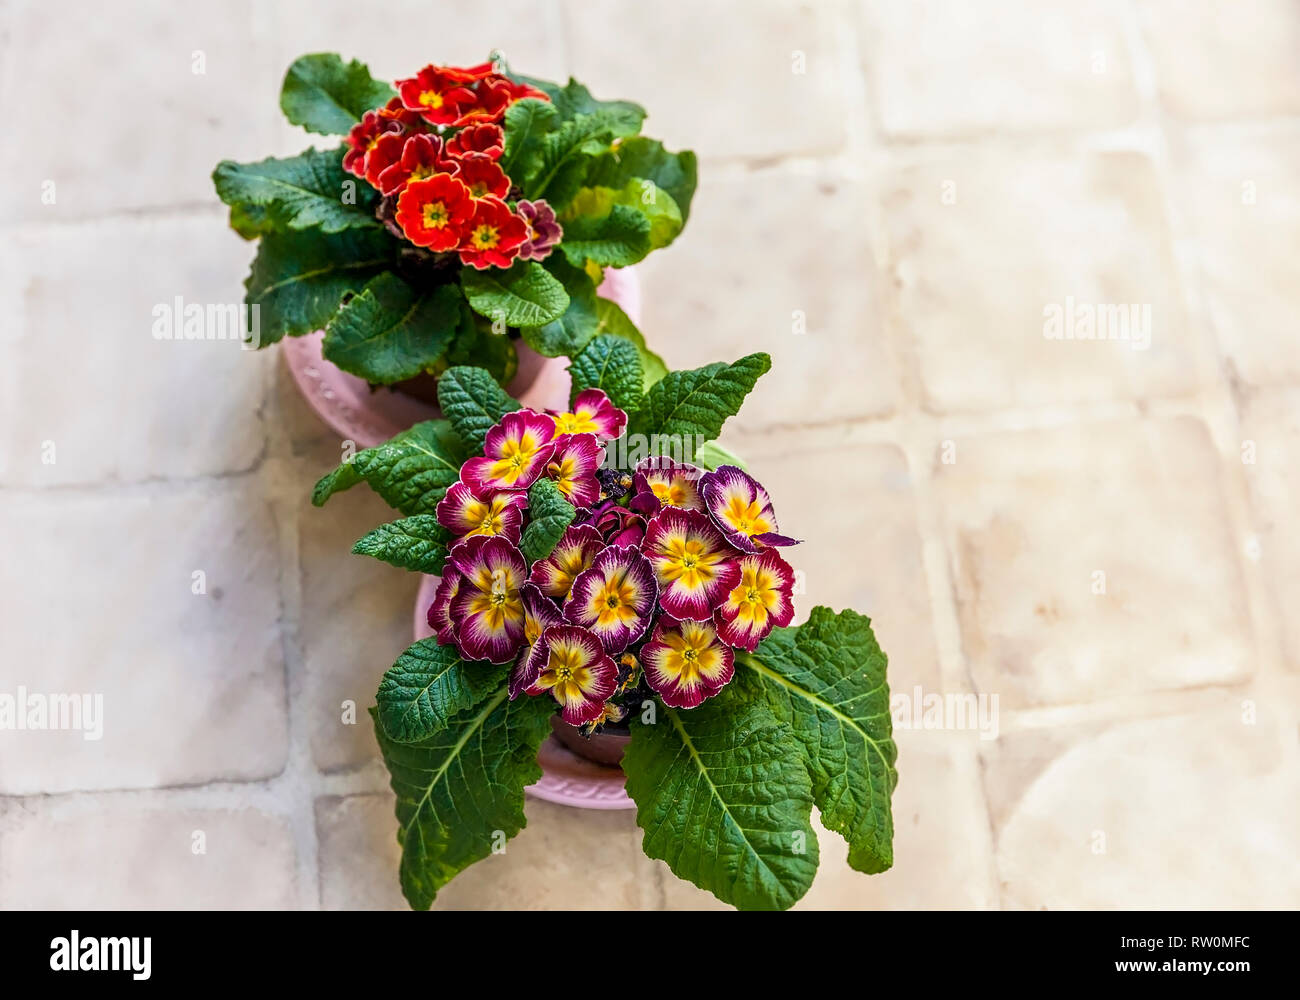 Primula Auricular Plants. Two colourful flower pots on a beige tile surface. Stock Image. Stock Photo